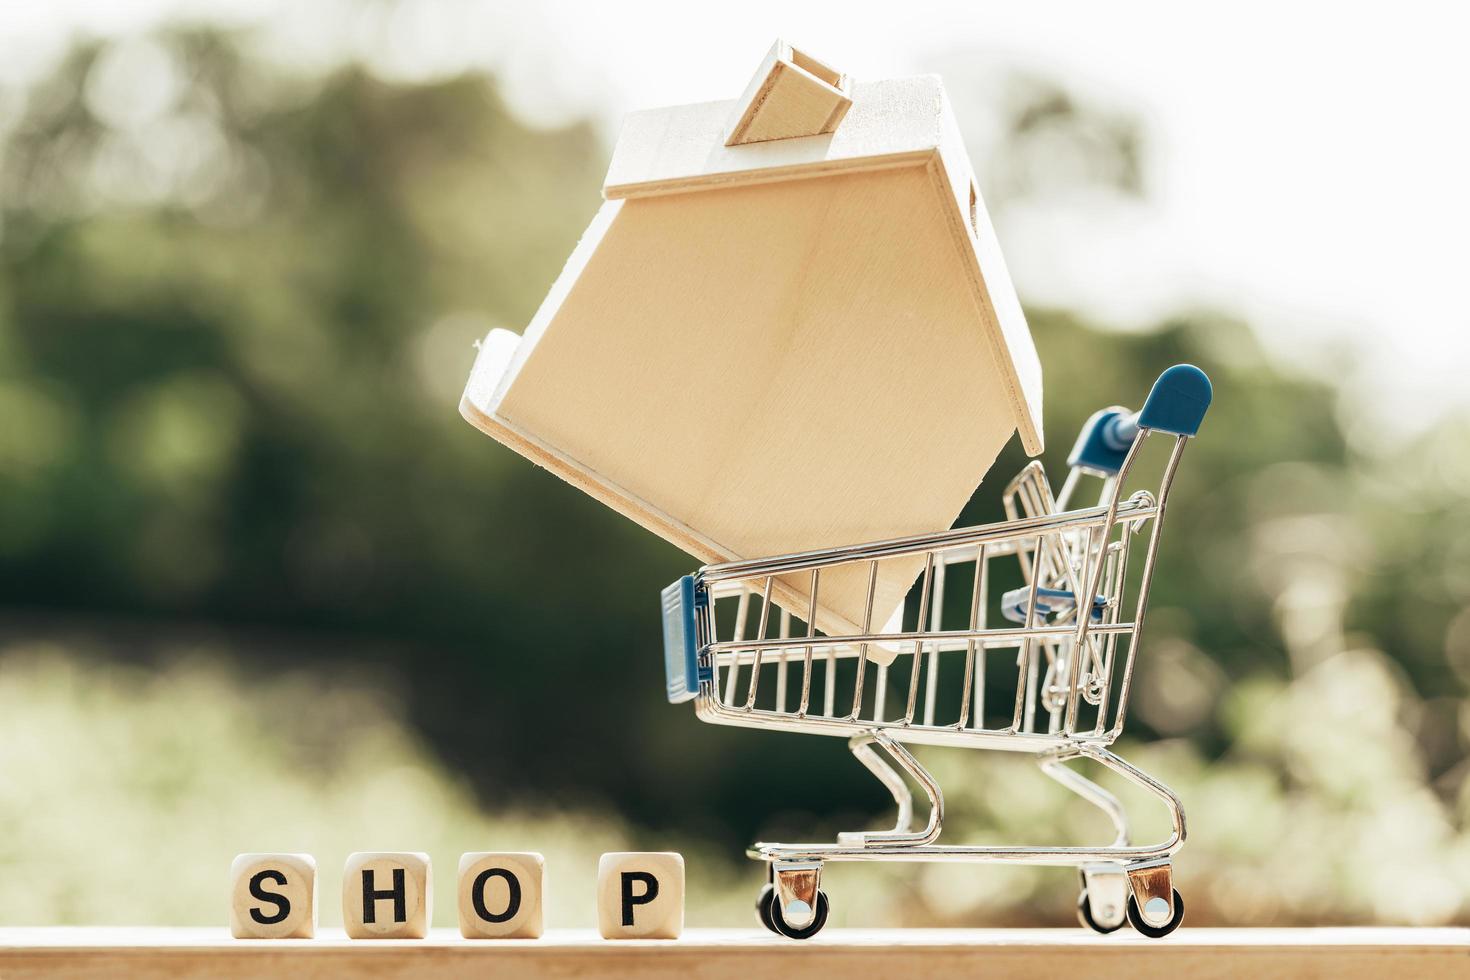 Miniature with mock up wood house on shopping cart and block word shop photo